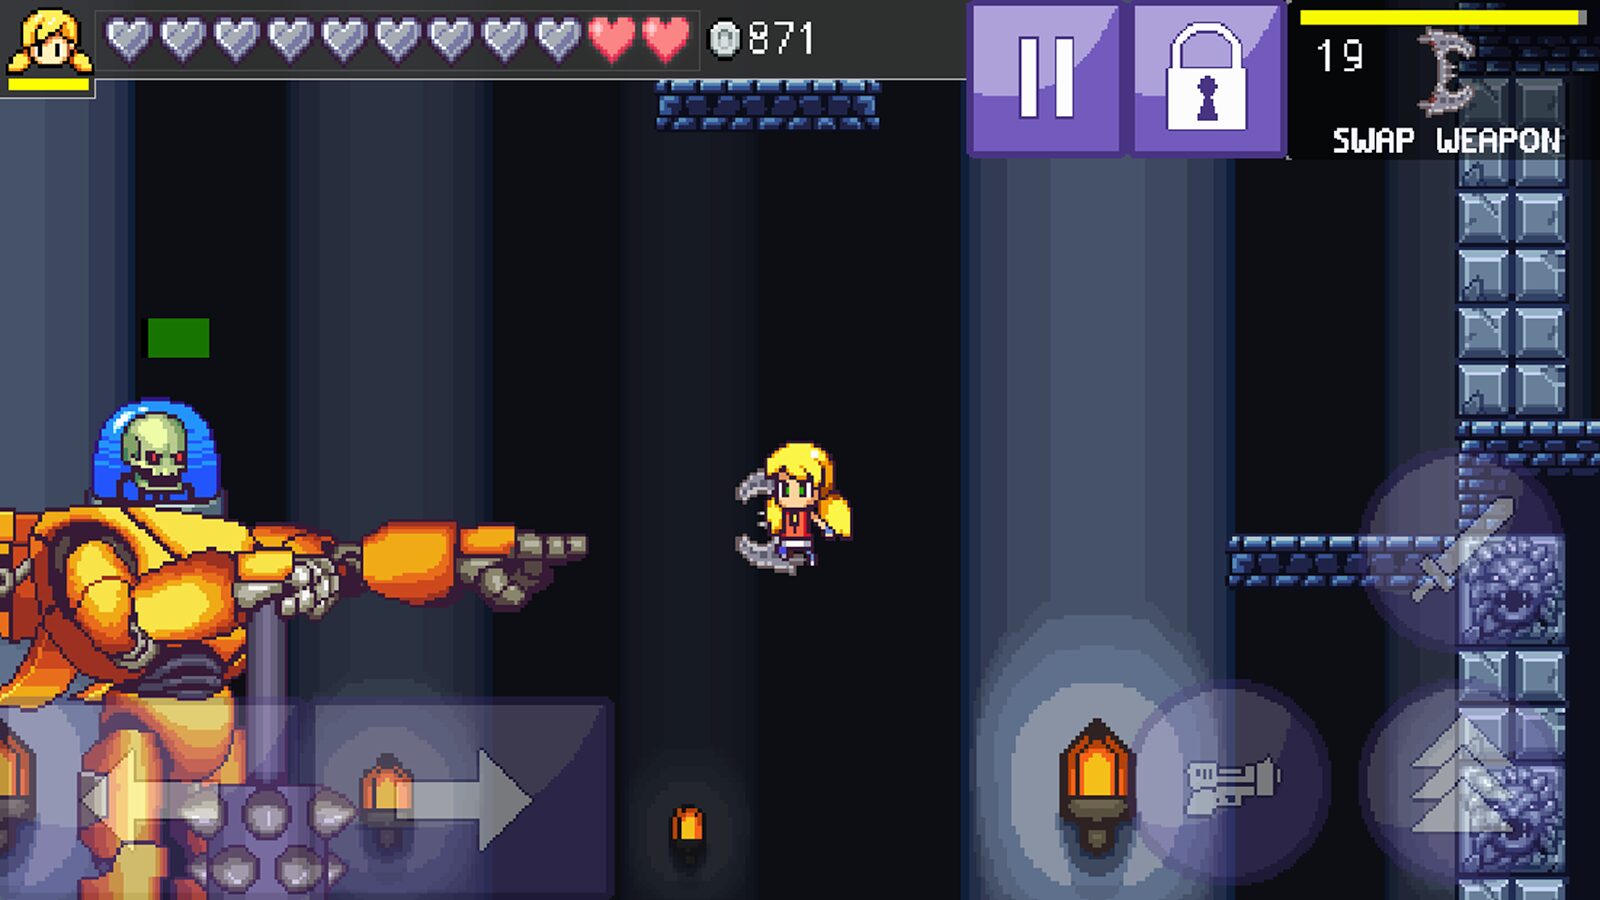 Cally's Cave 3, Derniers jeux Android : Cally&rsquo;s Cave 3, Microgue et Random Fighters